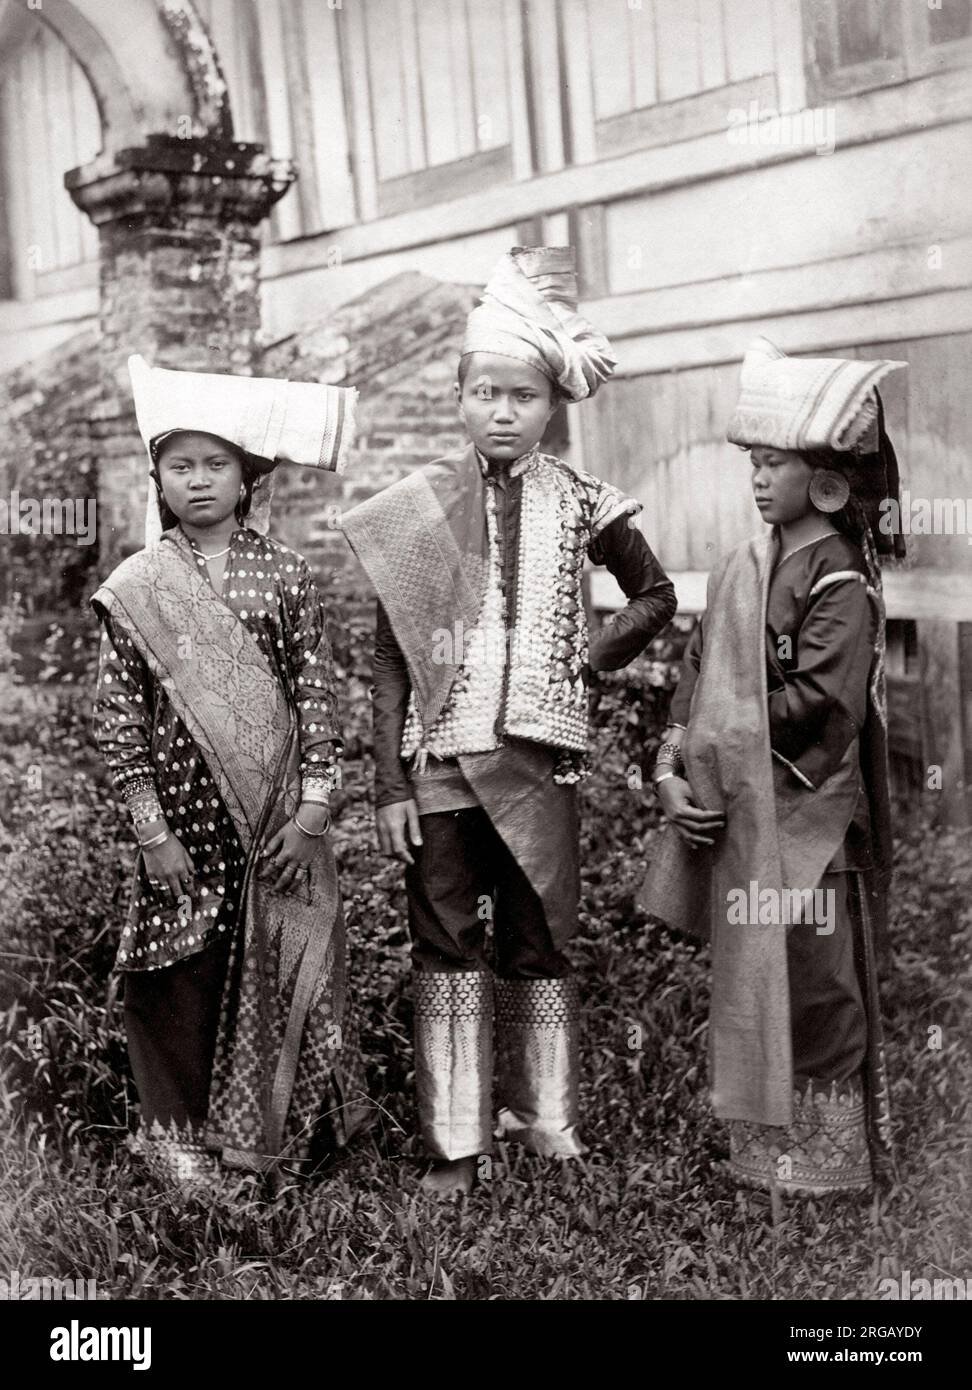 Children, probably Dutch East Indies, Indonesia, c.1880's. Stock Photo